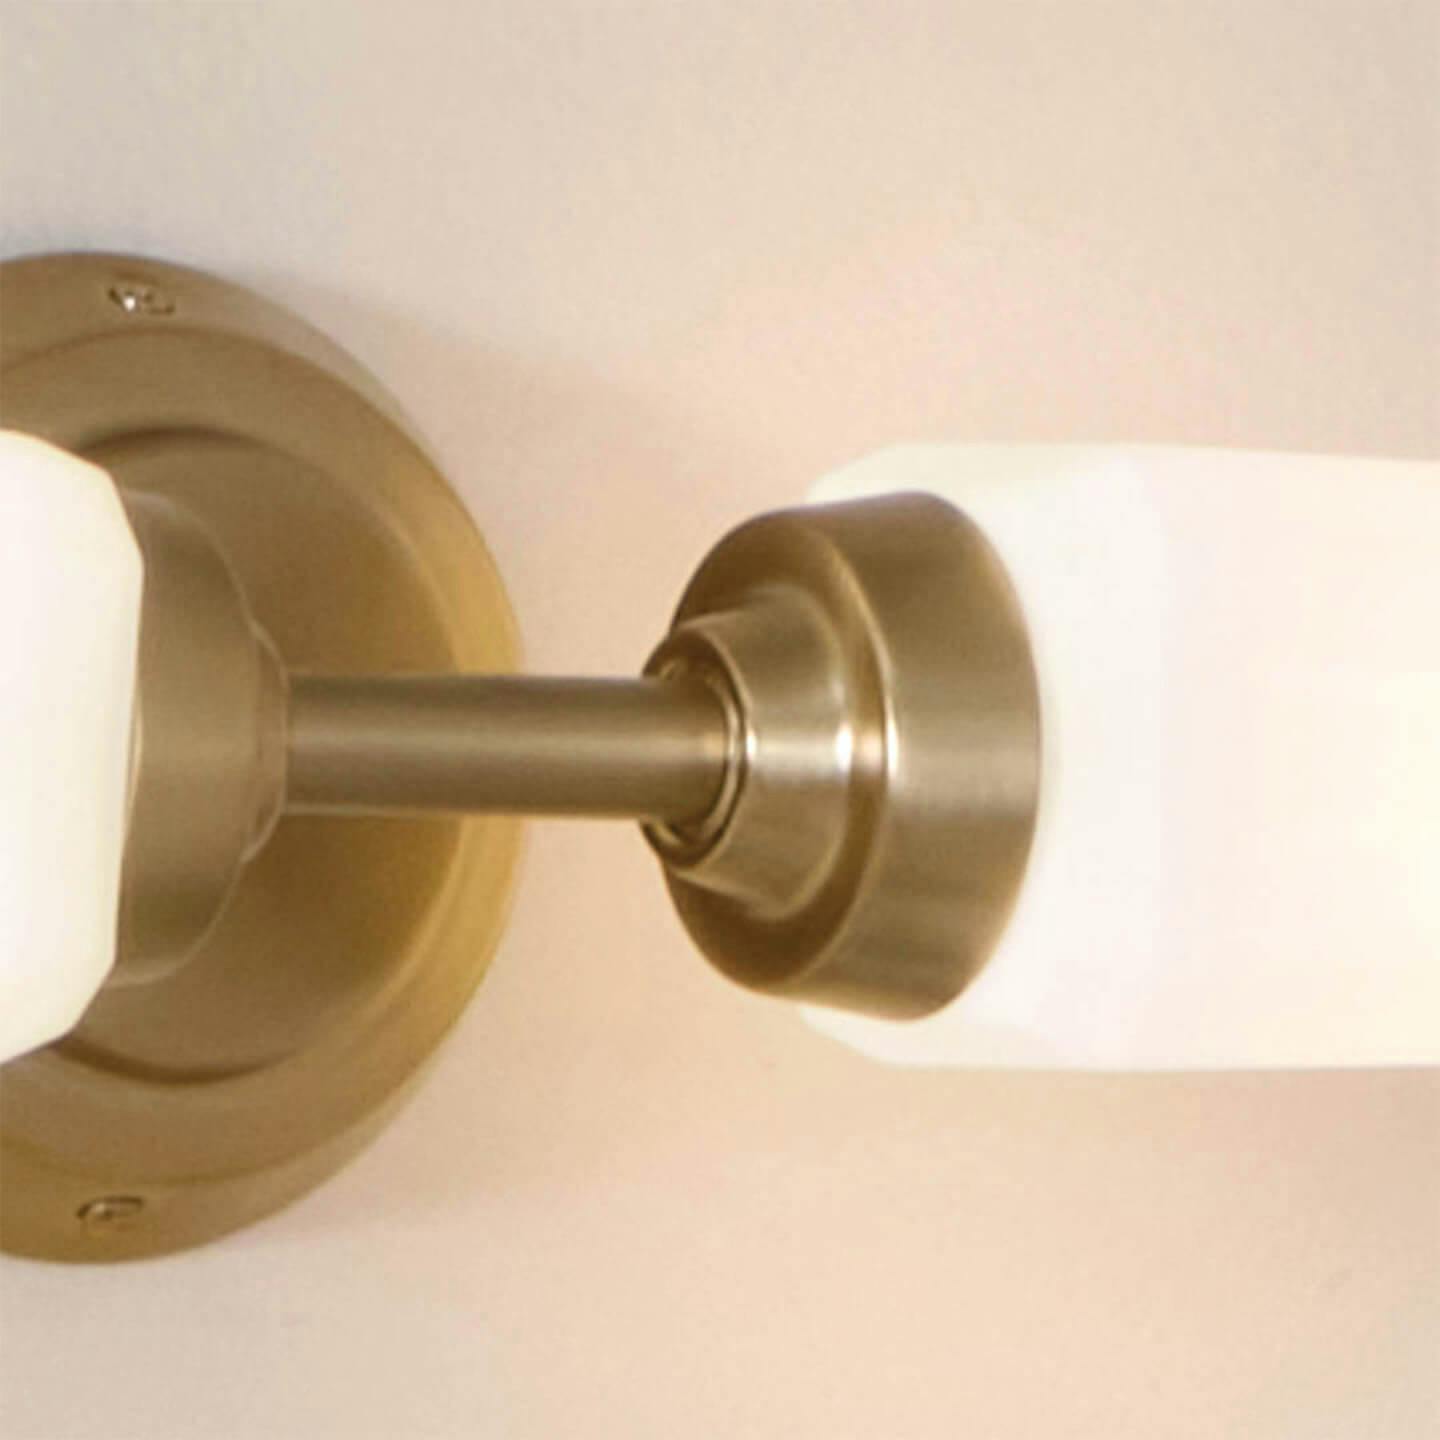 Detail shot of Truby 2 light sconce with gold finish